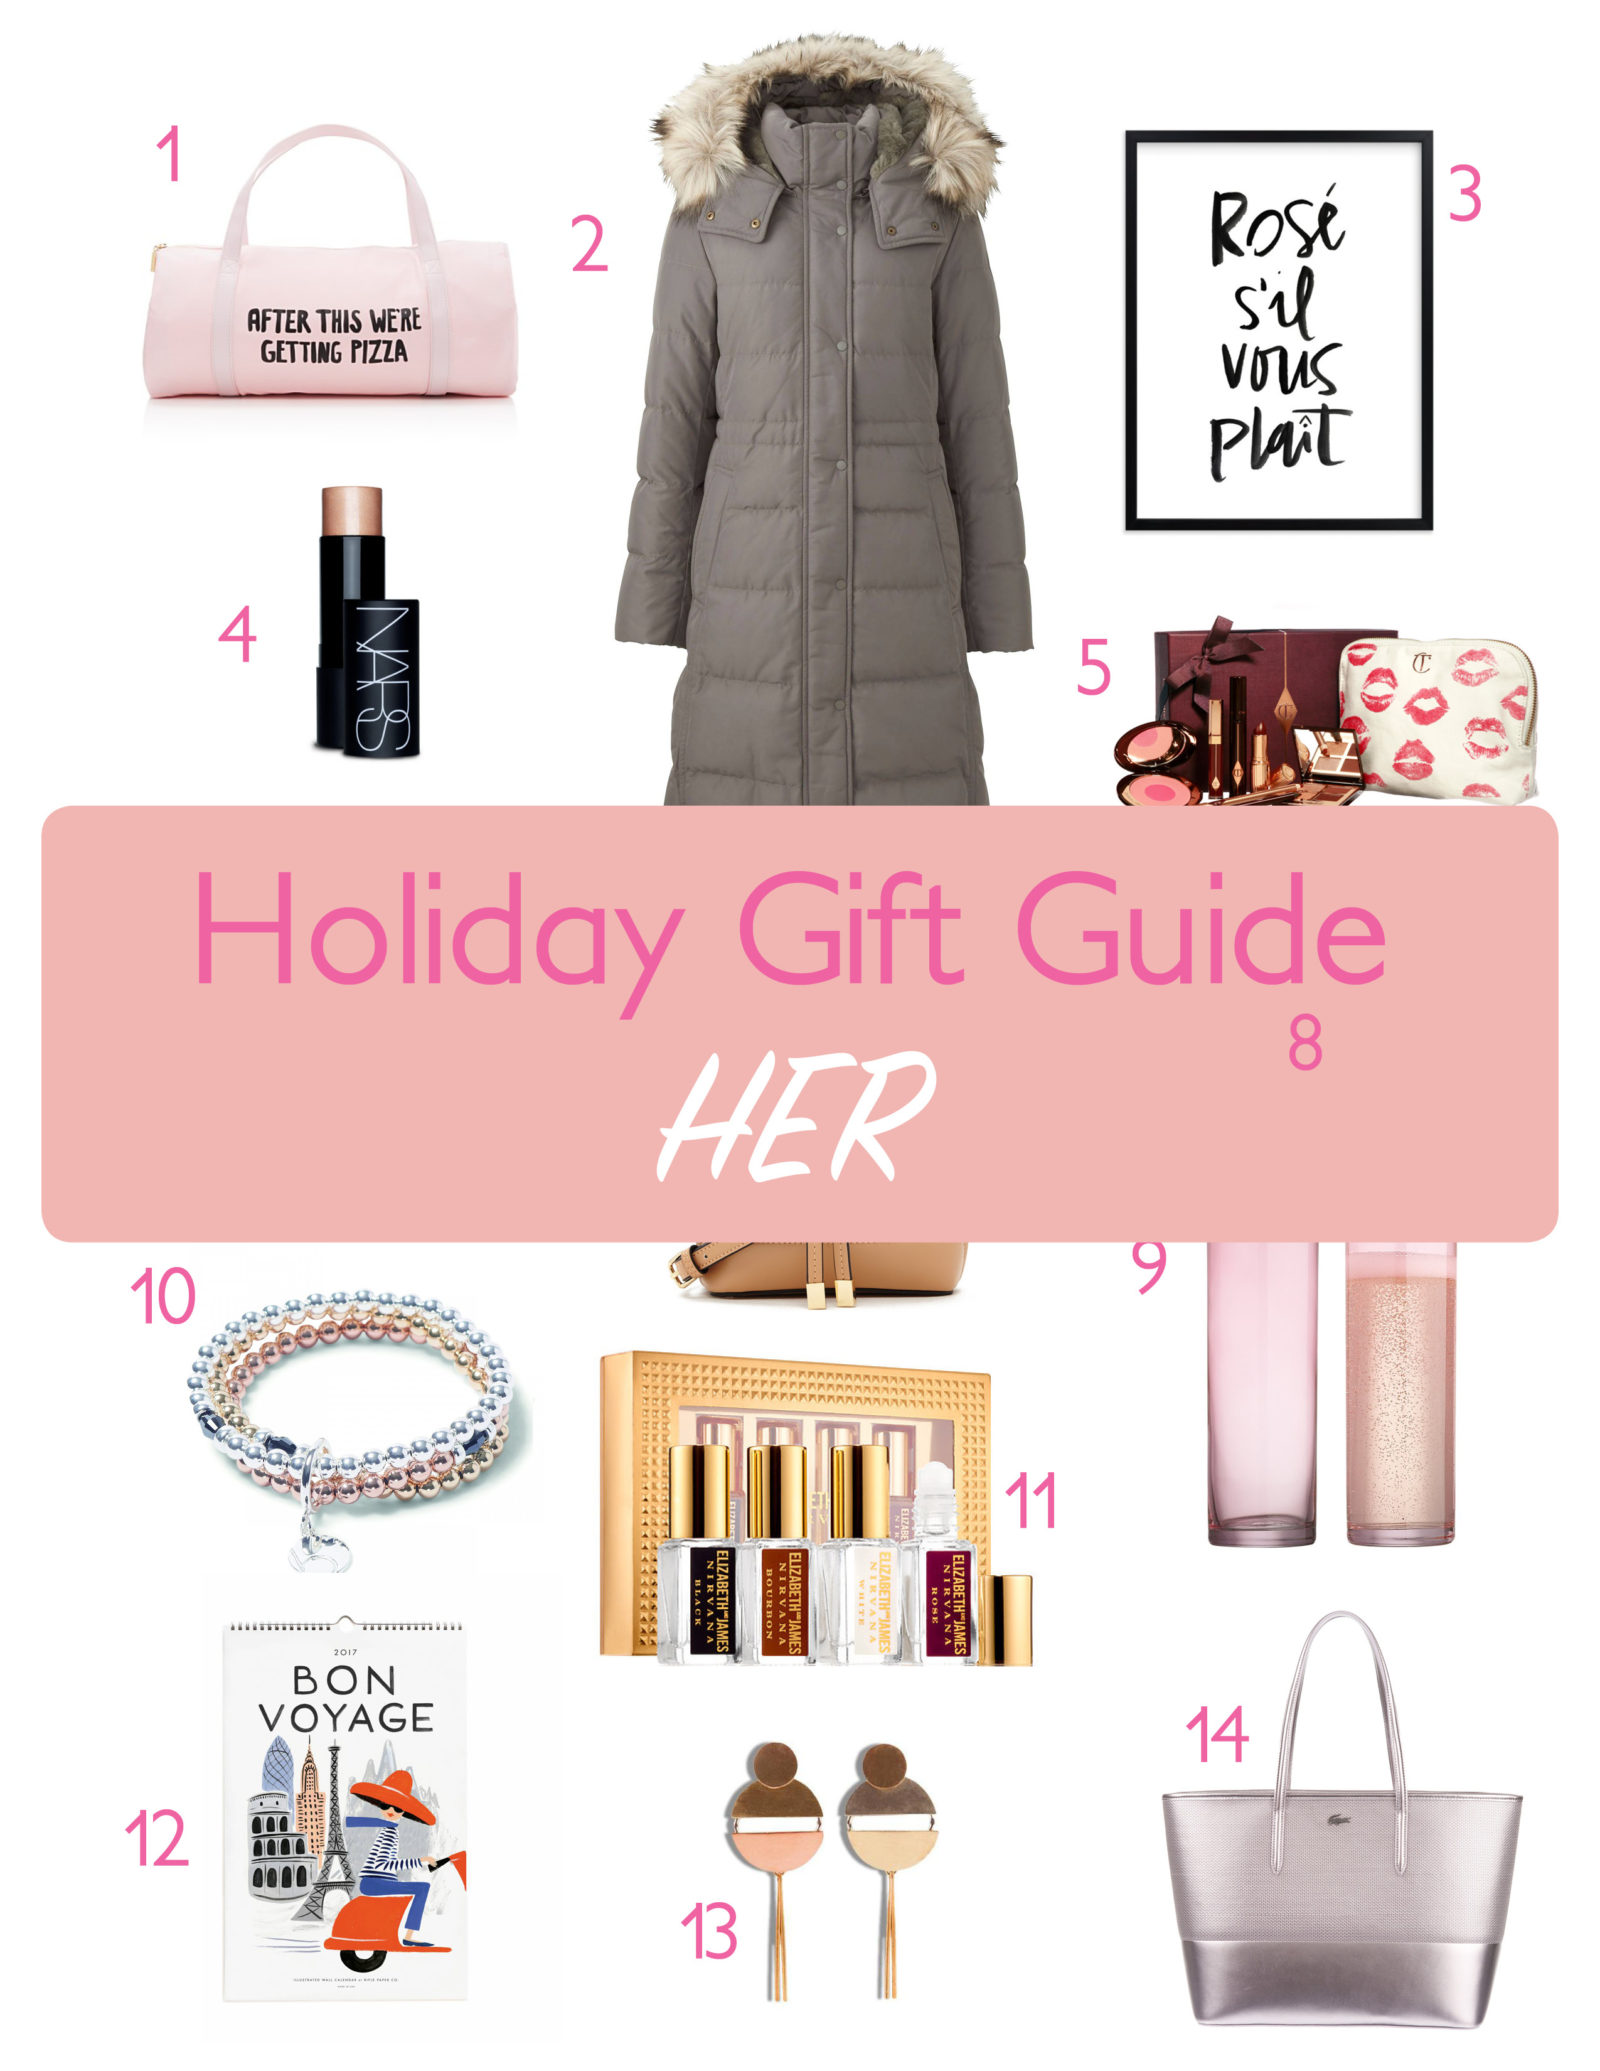 Check out the 2016 holiday gift guide for her. Your significant other, mom, sister, aunt, best friend, all the special ladies in your life.